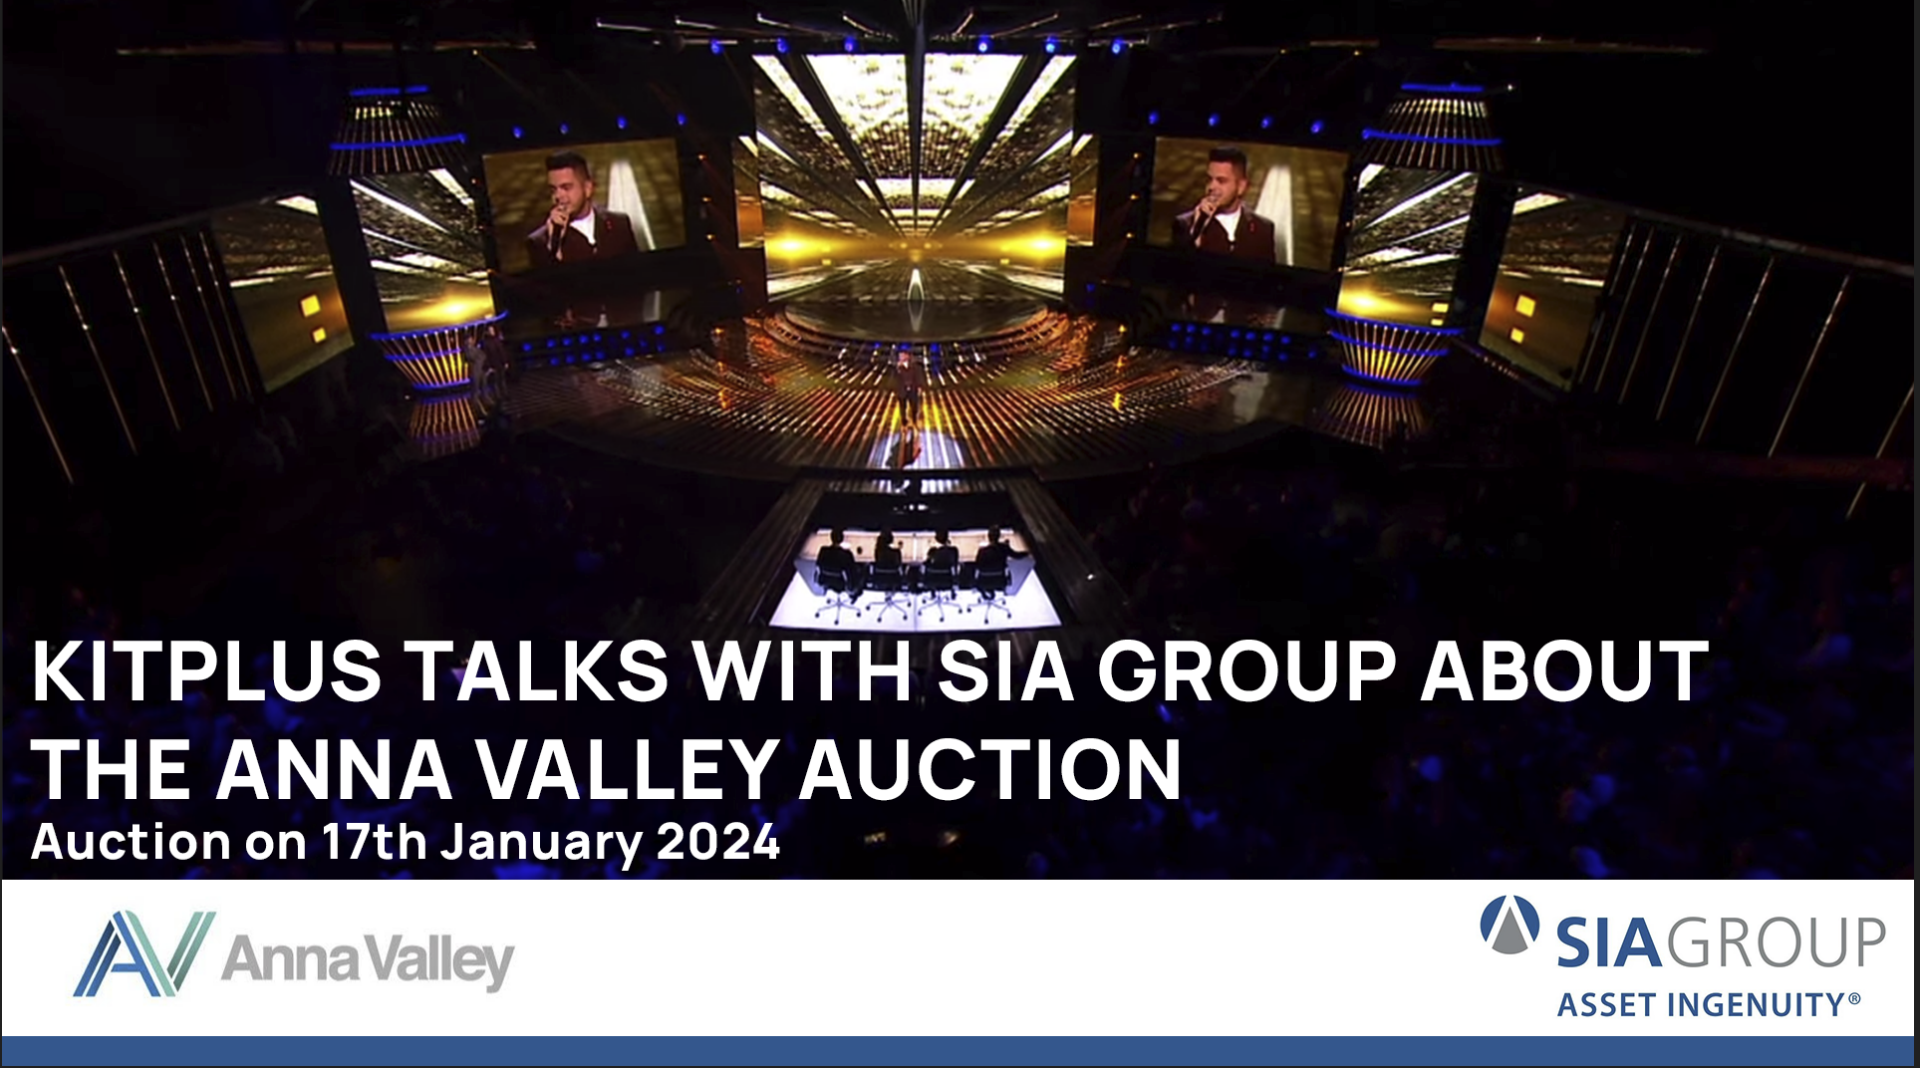 KitPlus visits the Anna Valley site to discuss the auction with SIA Group